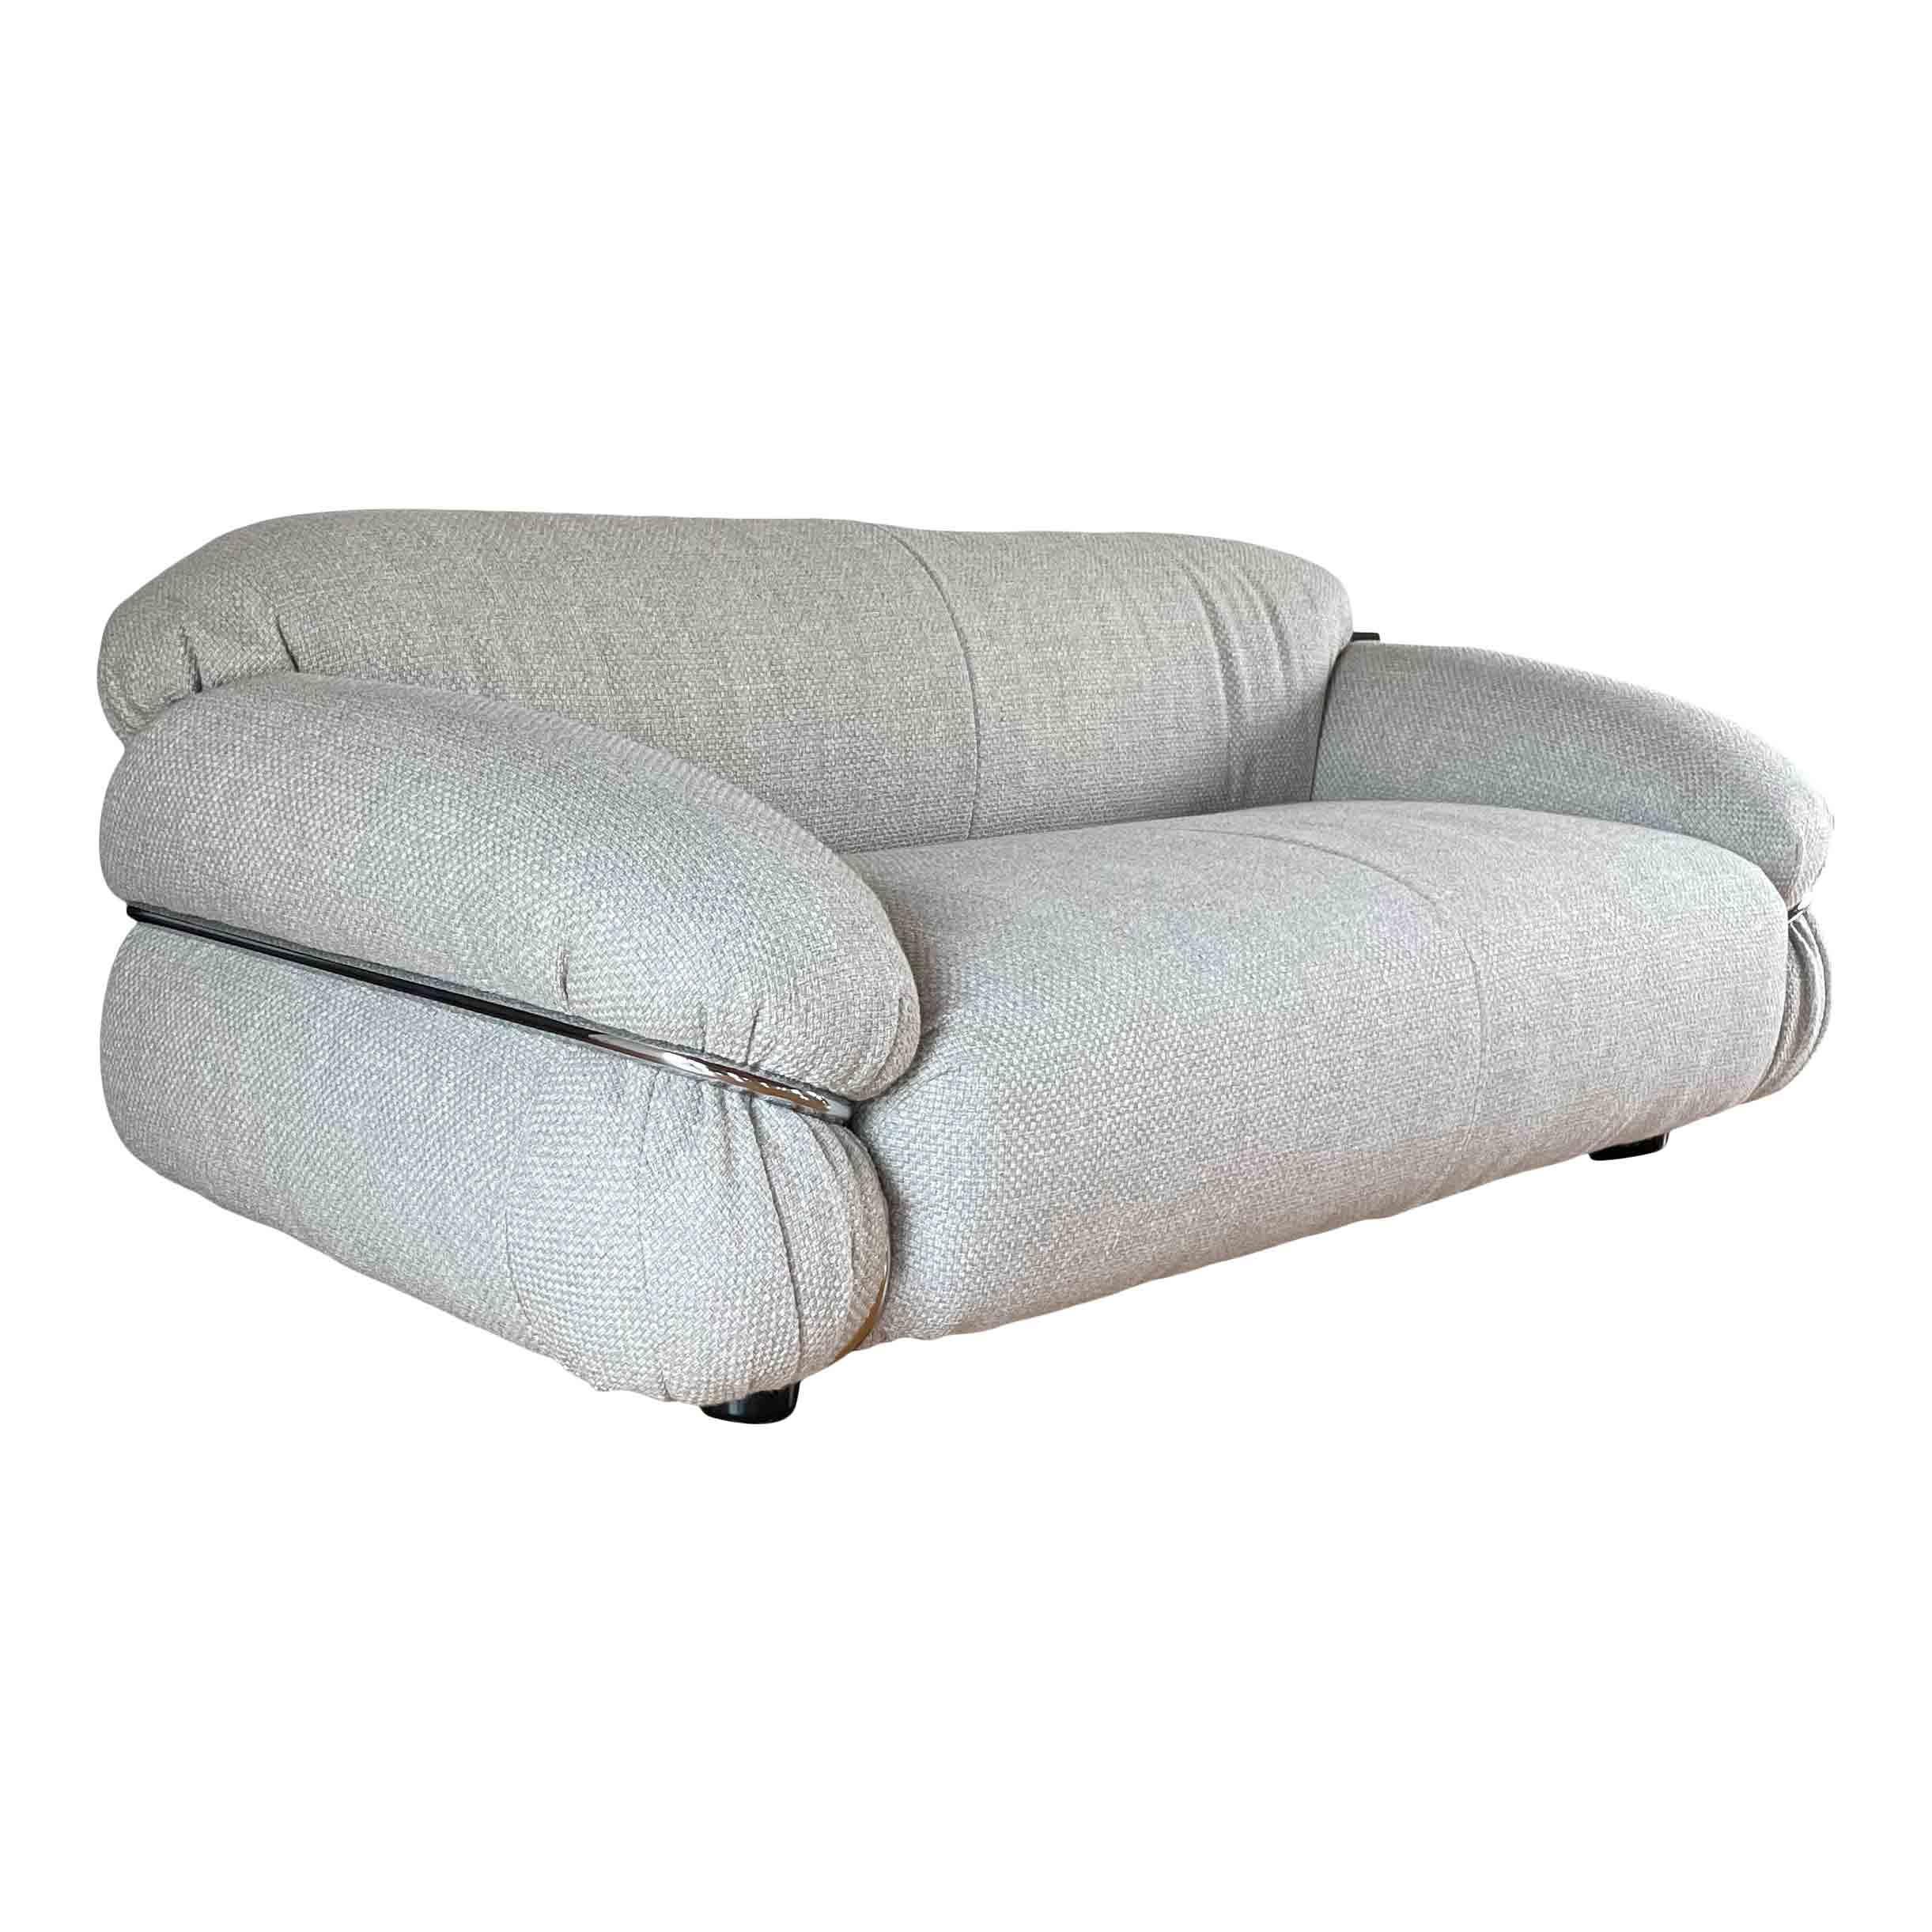 Sesann two-seater sofa, designed by Gianfranco Frattini in 1970 and produced by the Italian manufacturer Cassina.

It features wool bouclé upholstery and a chrome tubular cage as structural support.

Restored in Italy.

Cassina presented the